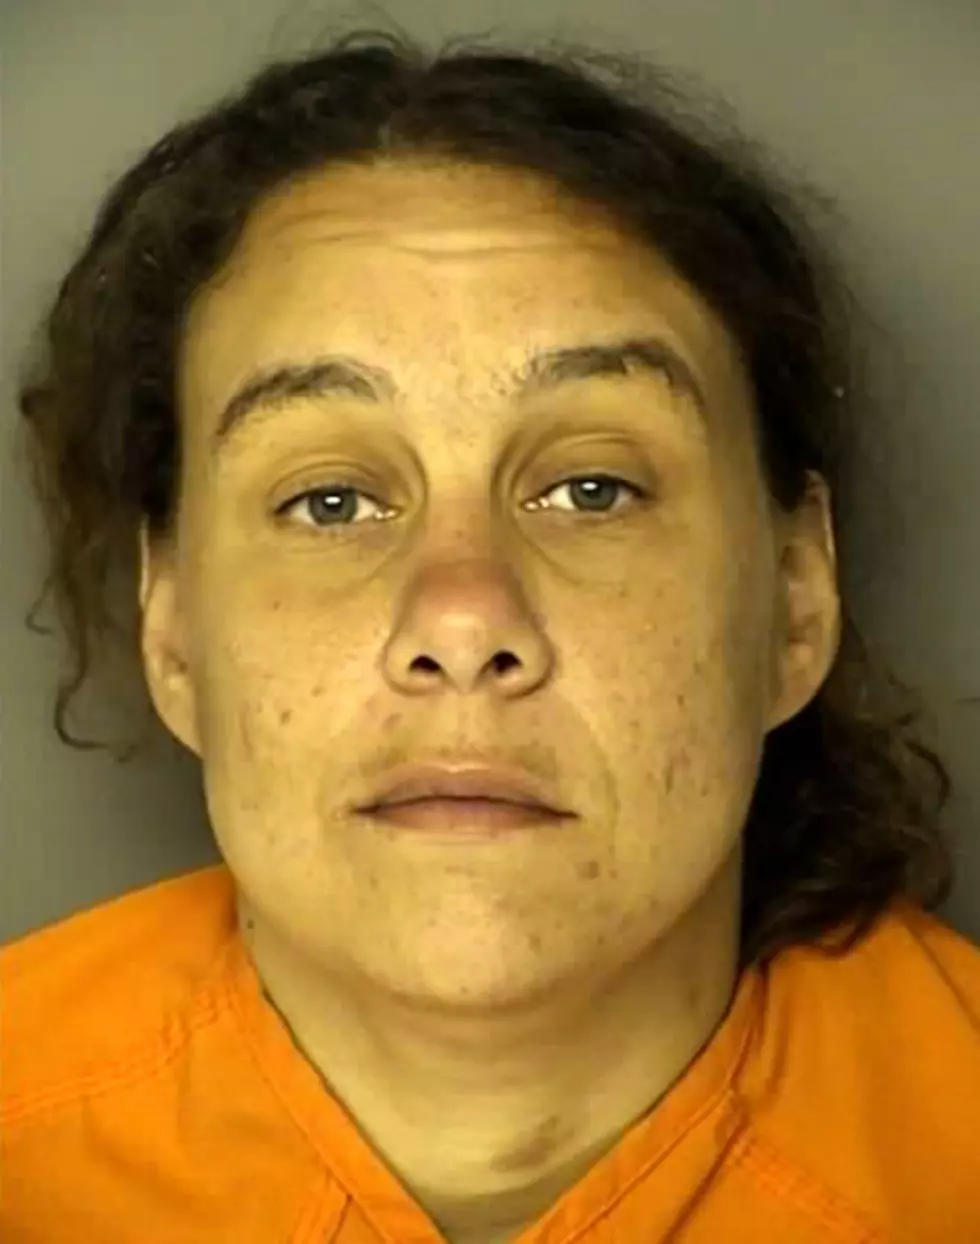 Woman Beat Up Neighbor for Passing Gas in Her Face